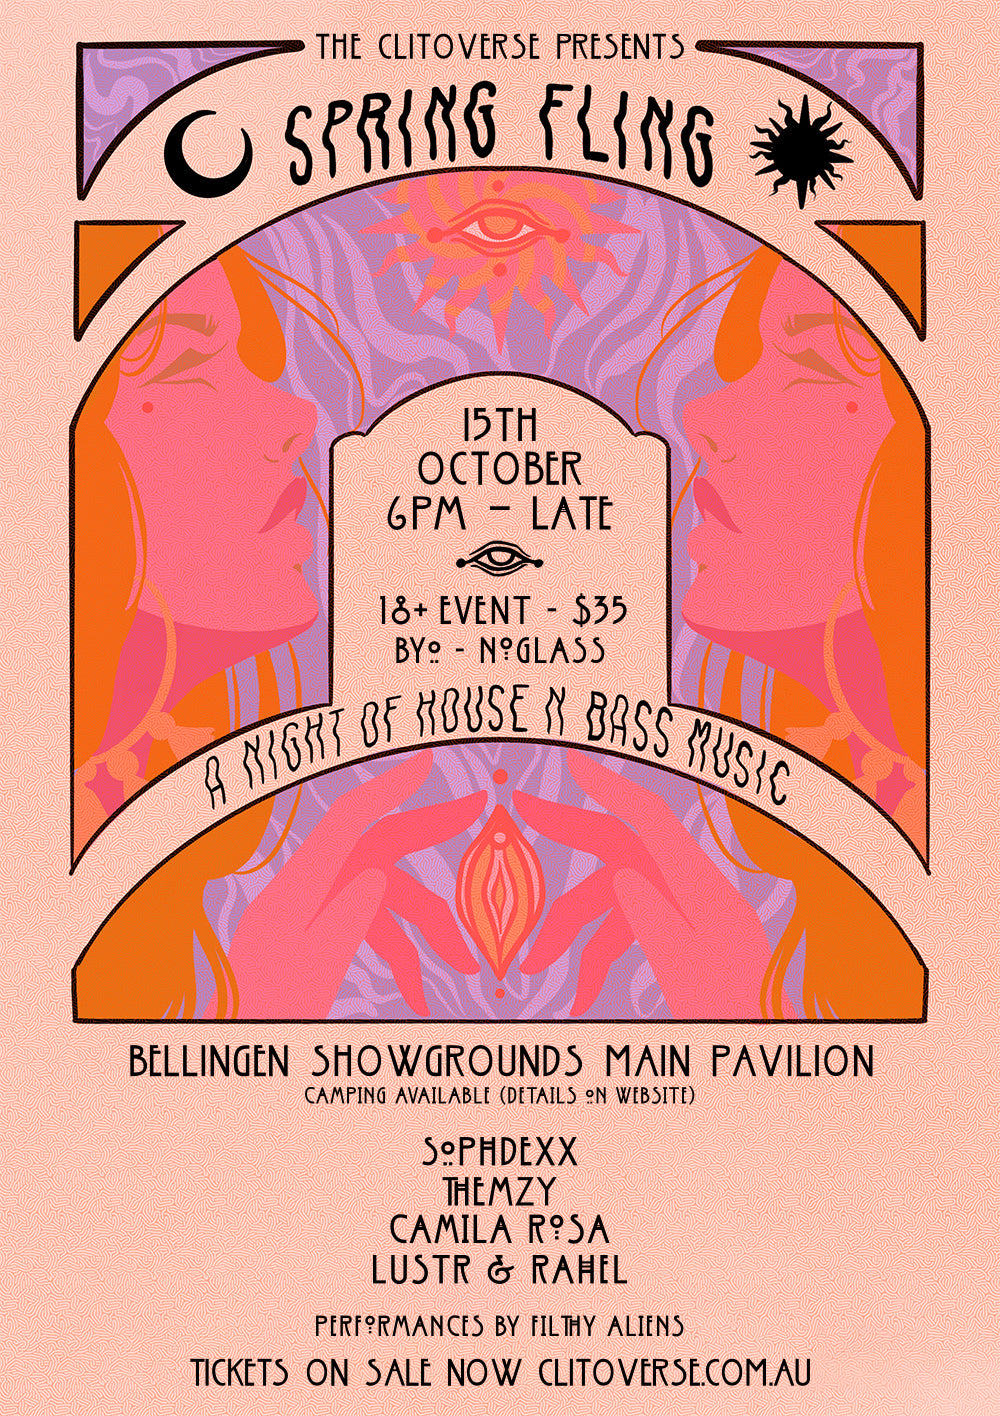 Spring Fling - A Night of House N' Bass Music